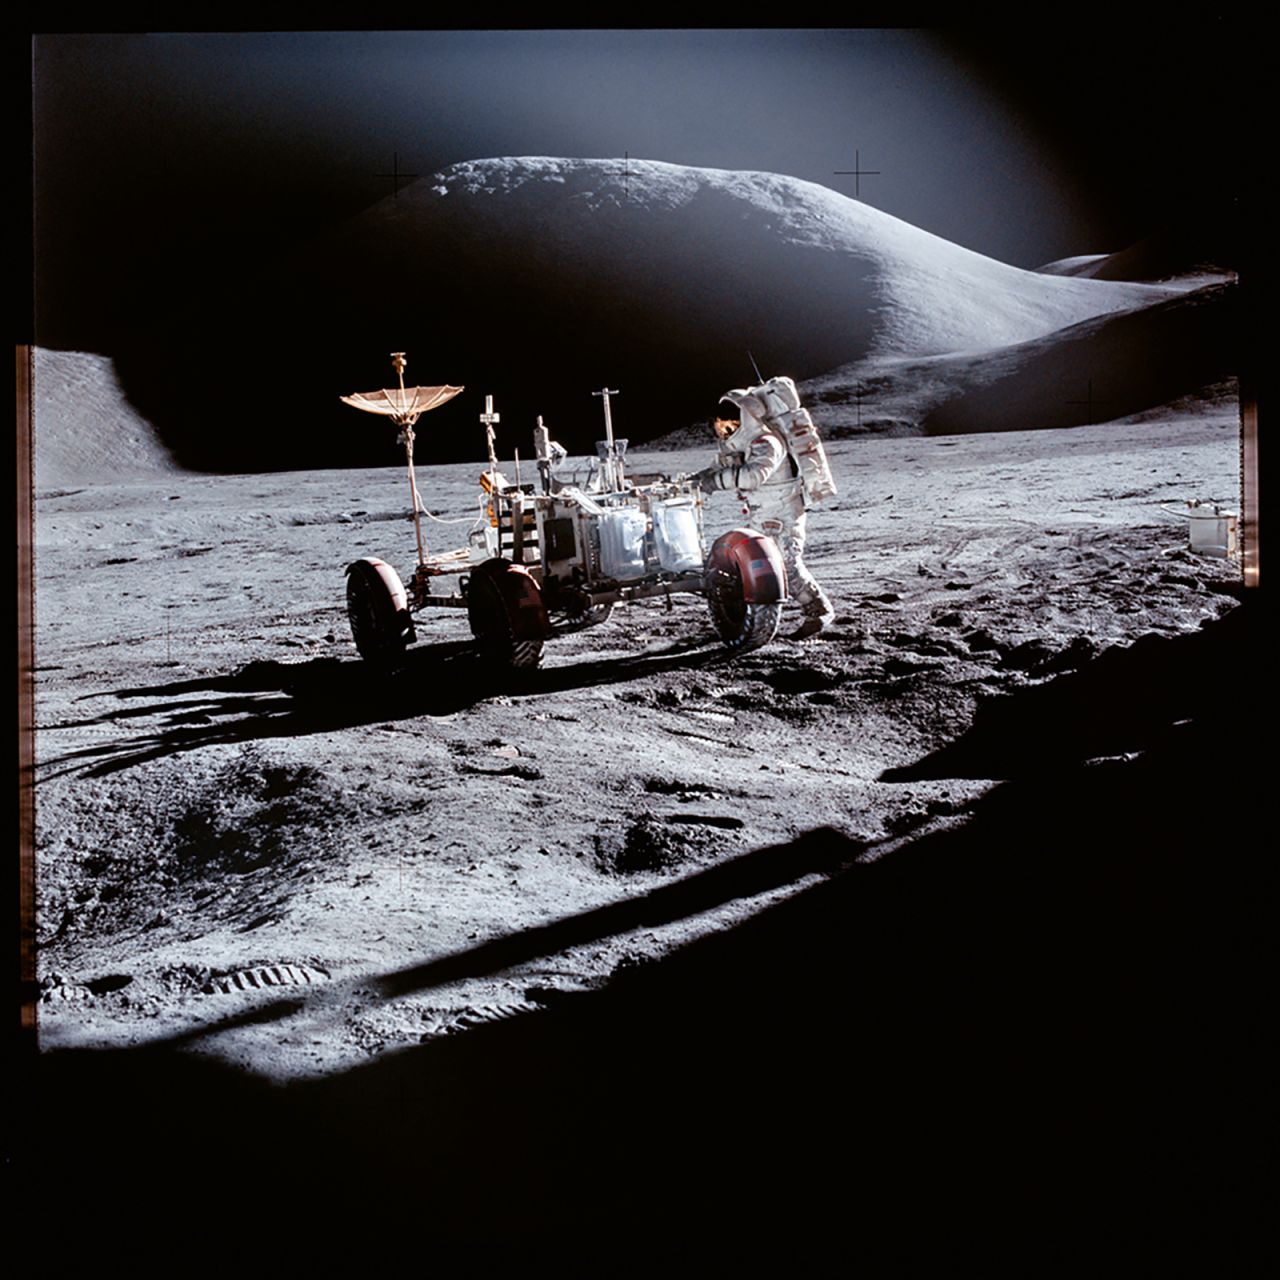 This image, taken during the 15th Apollo mission, shows the lunar surface.